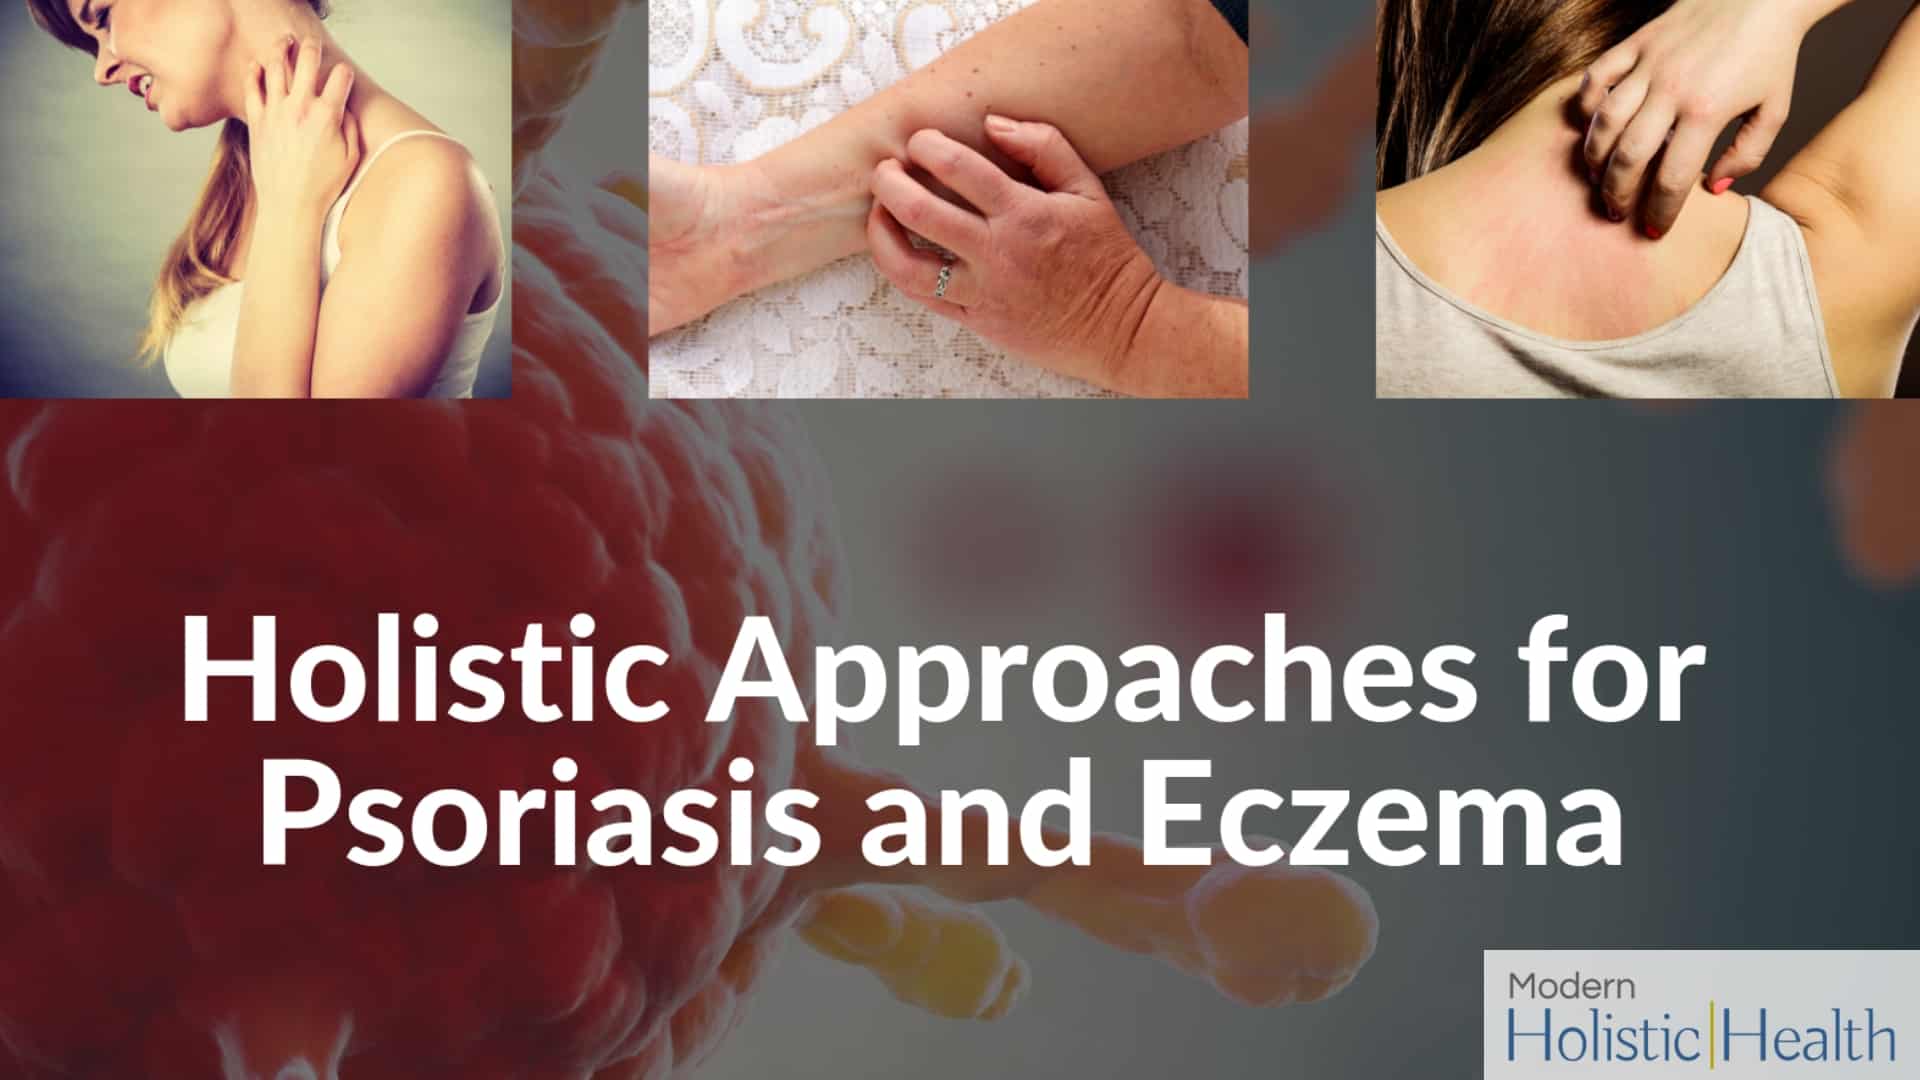 Holistic Approaches for Psoriasis and Eczema